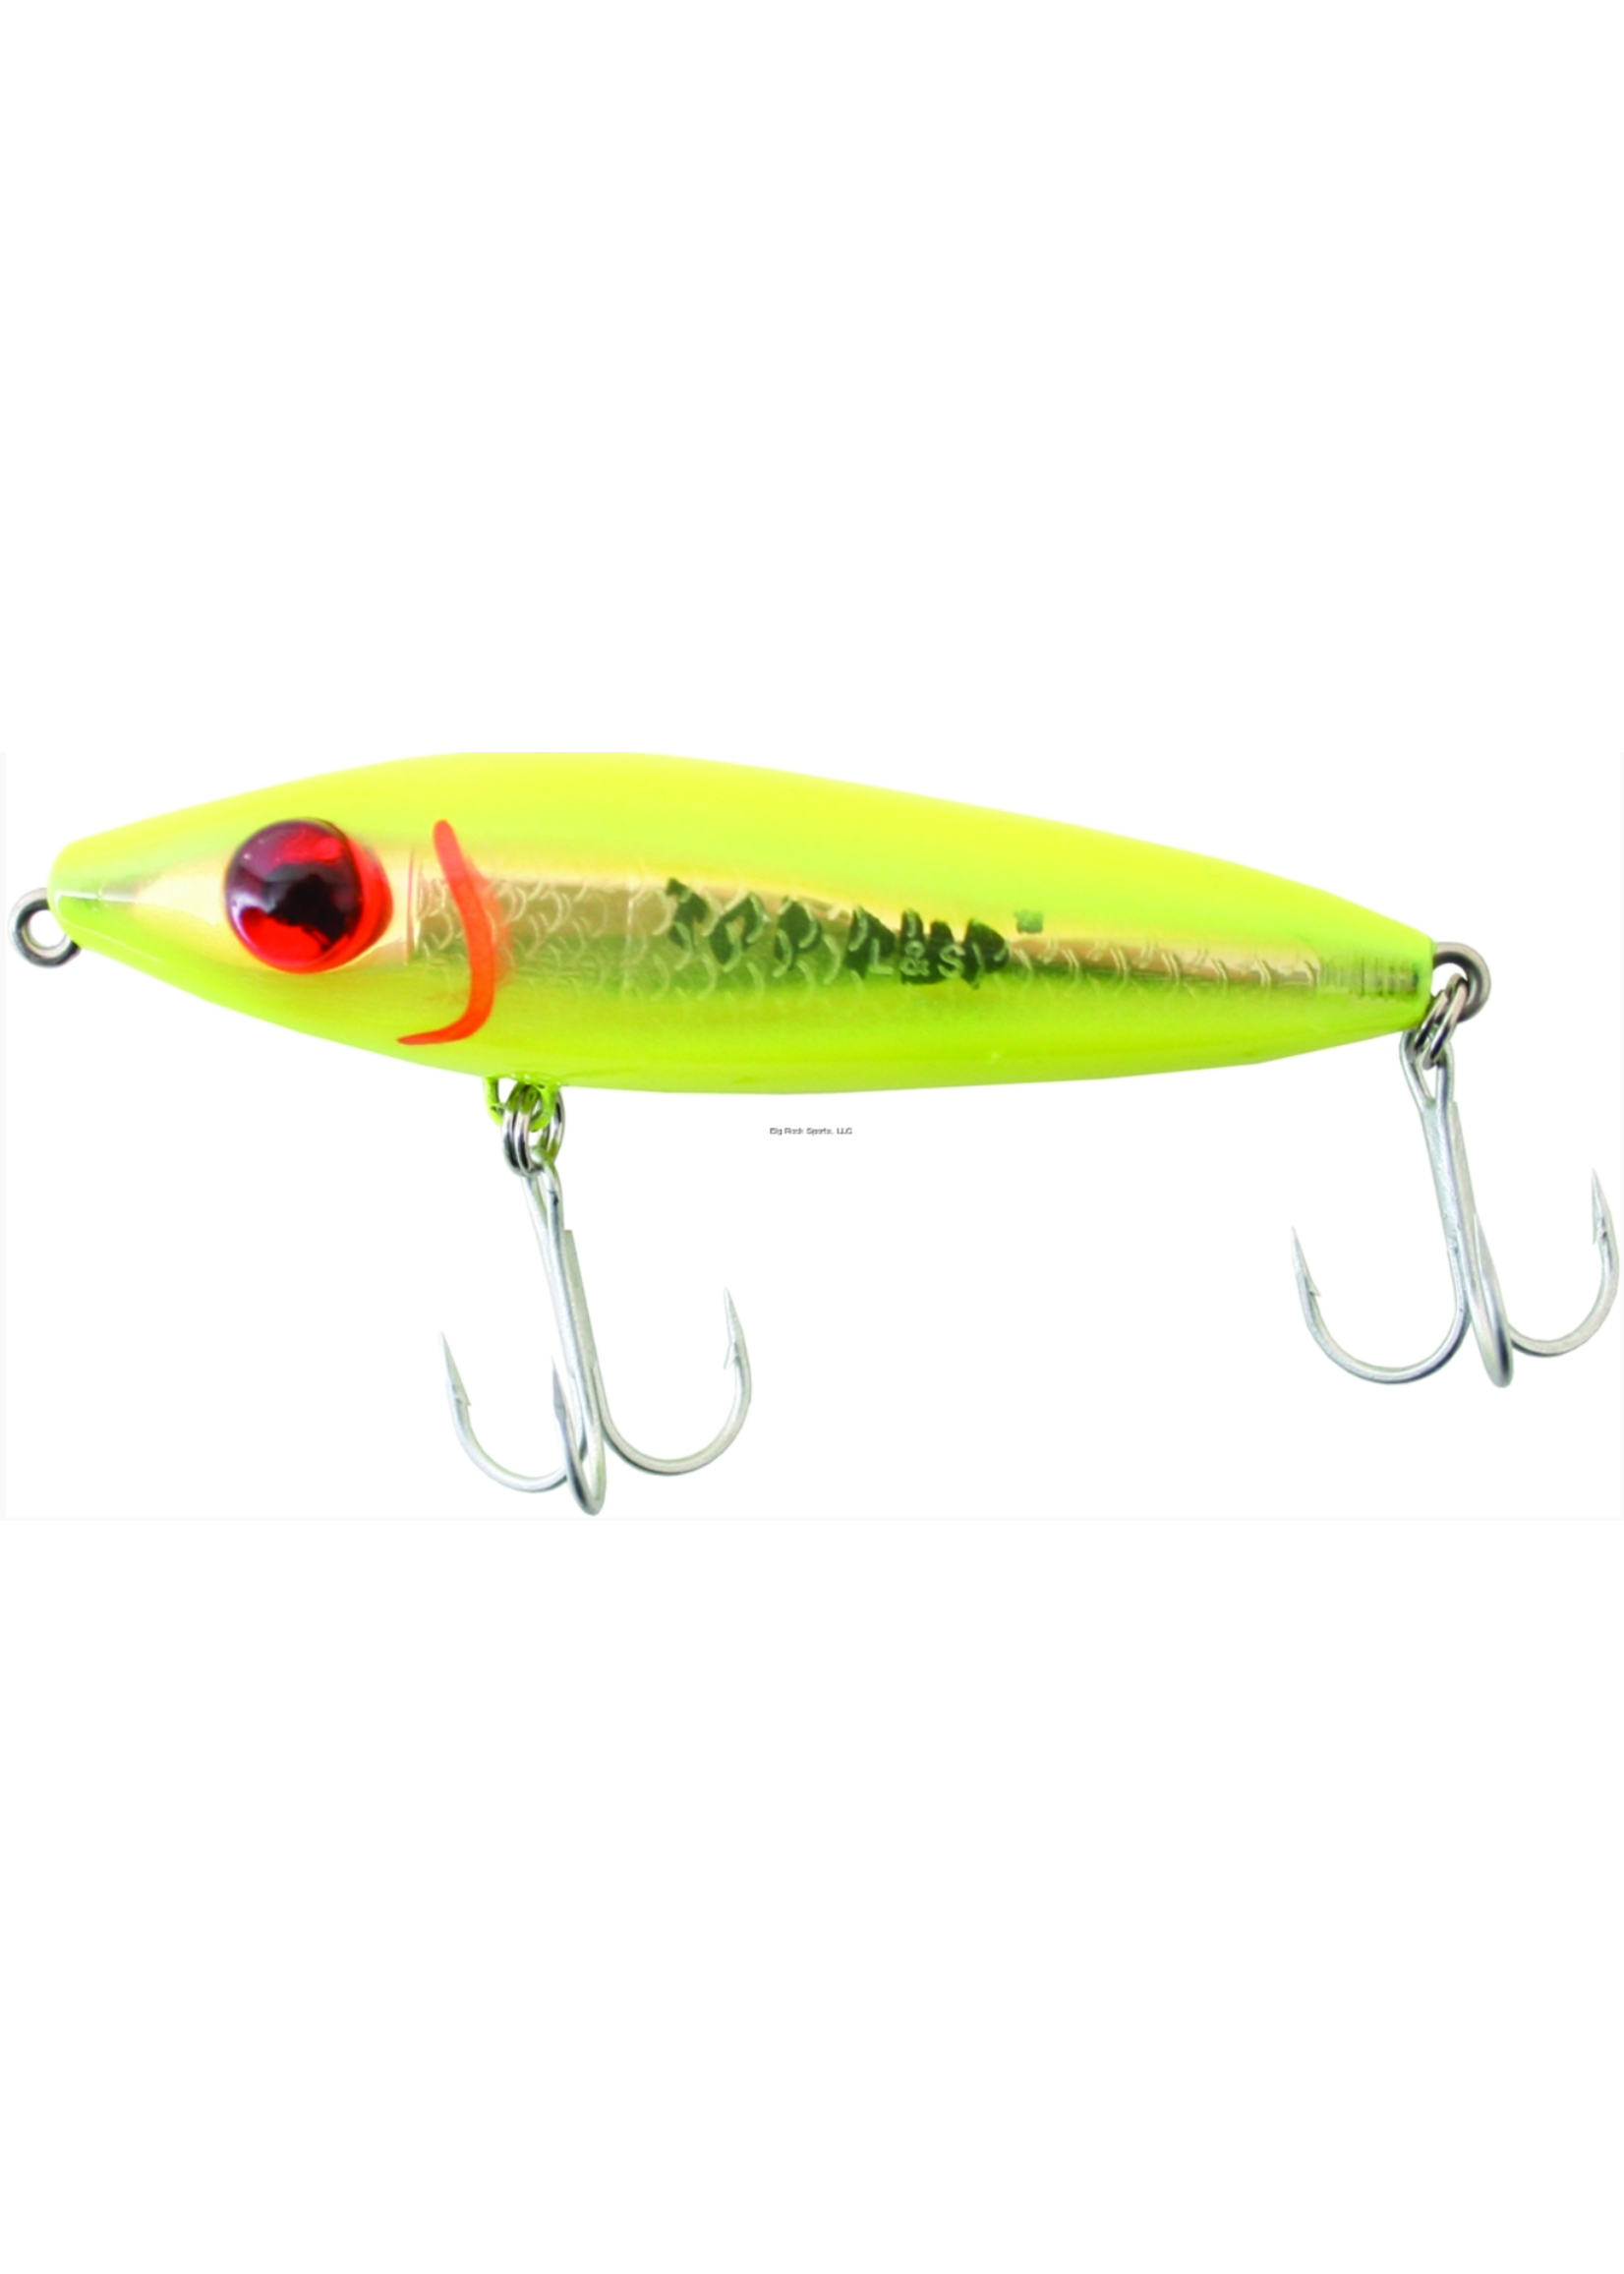 MirrOlure Top Pup Rattling Surface Walker, 3 1/2", 5/8 oz, Fluorescent Chartreuse Back & Belly/Gold Scale